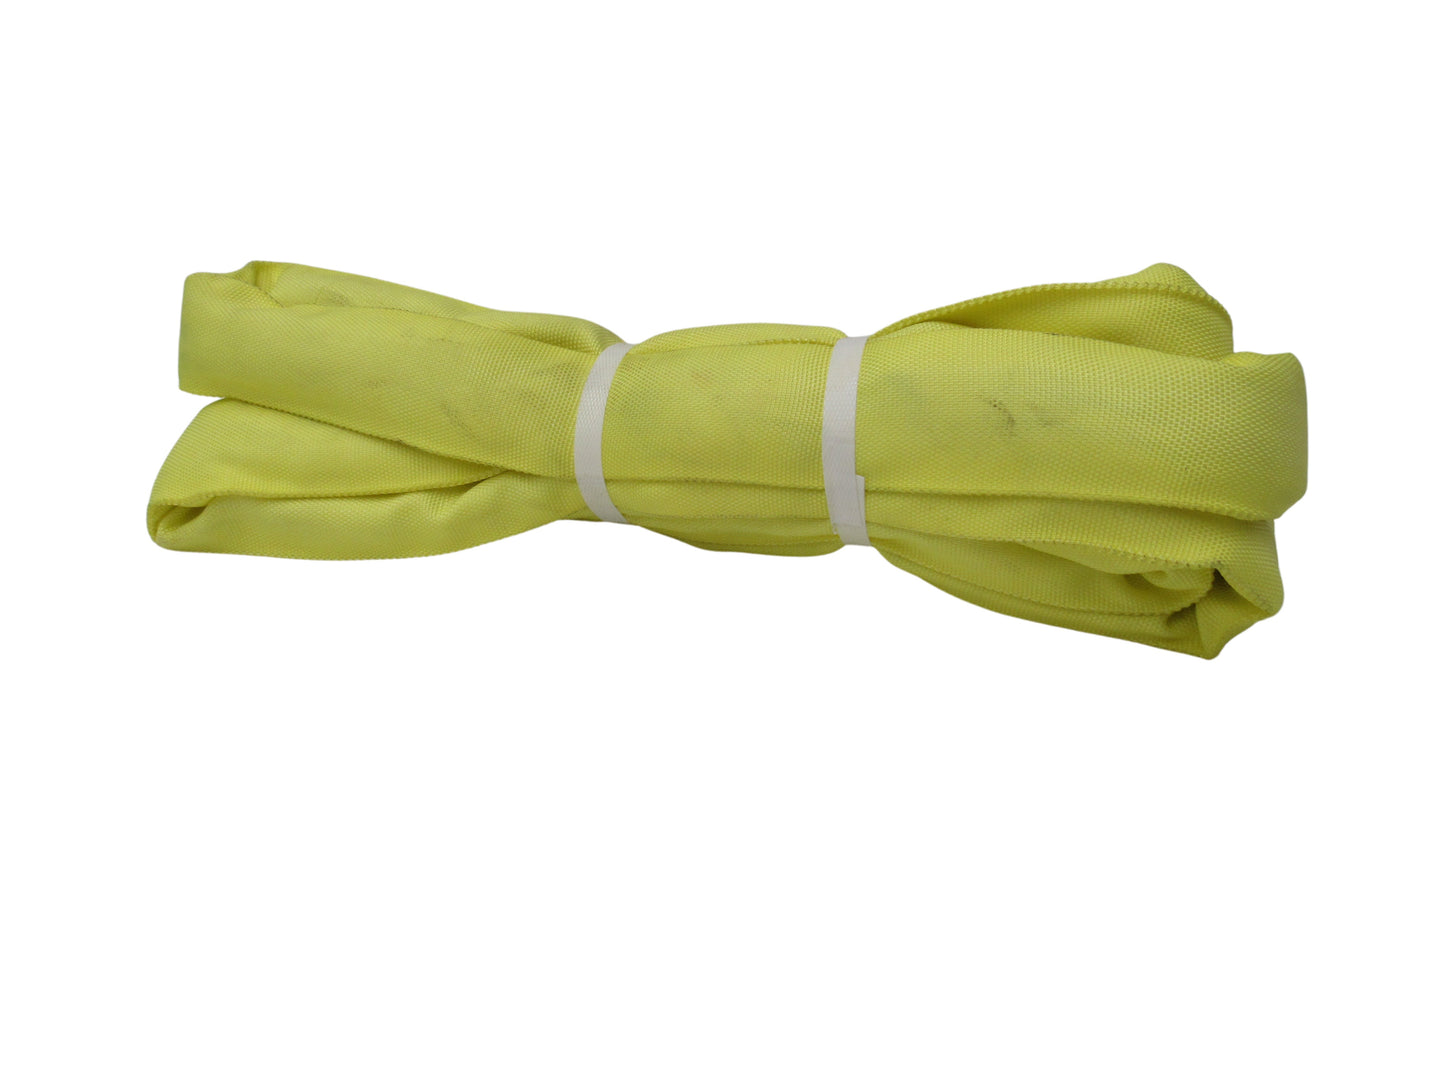 SWG 90 X 4' YELLOW ROUND SLING***MADE IN USA